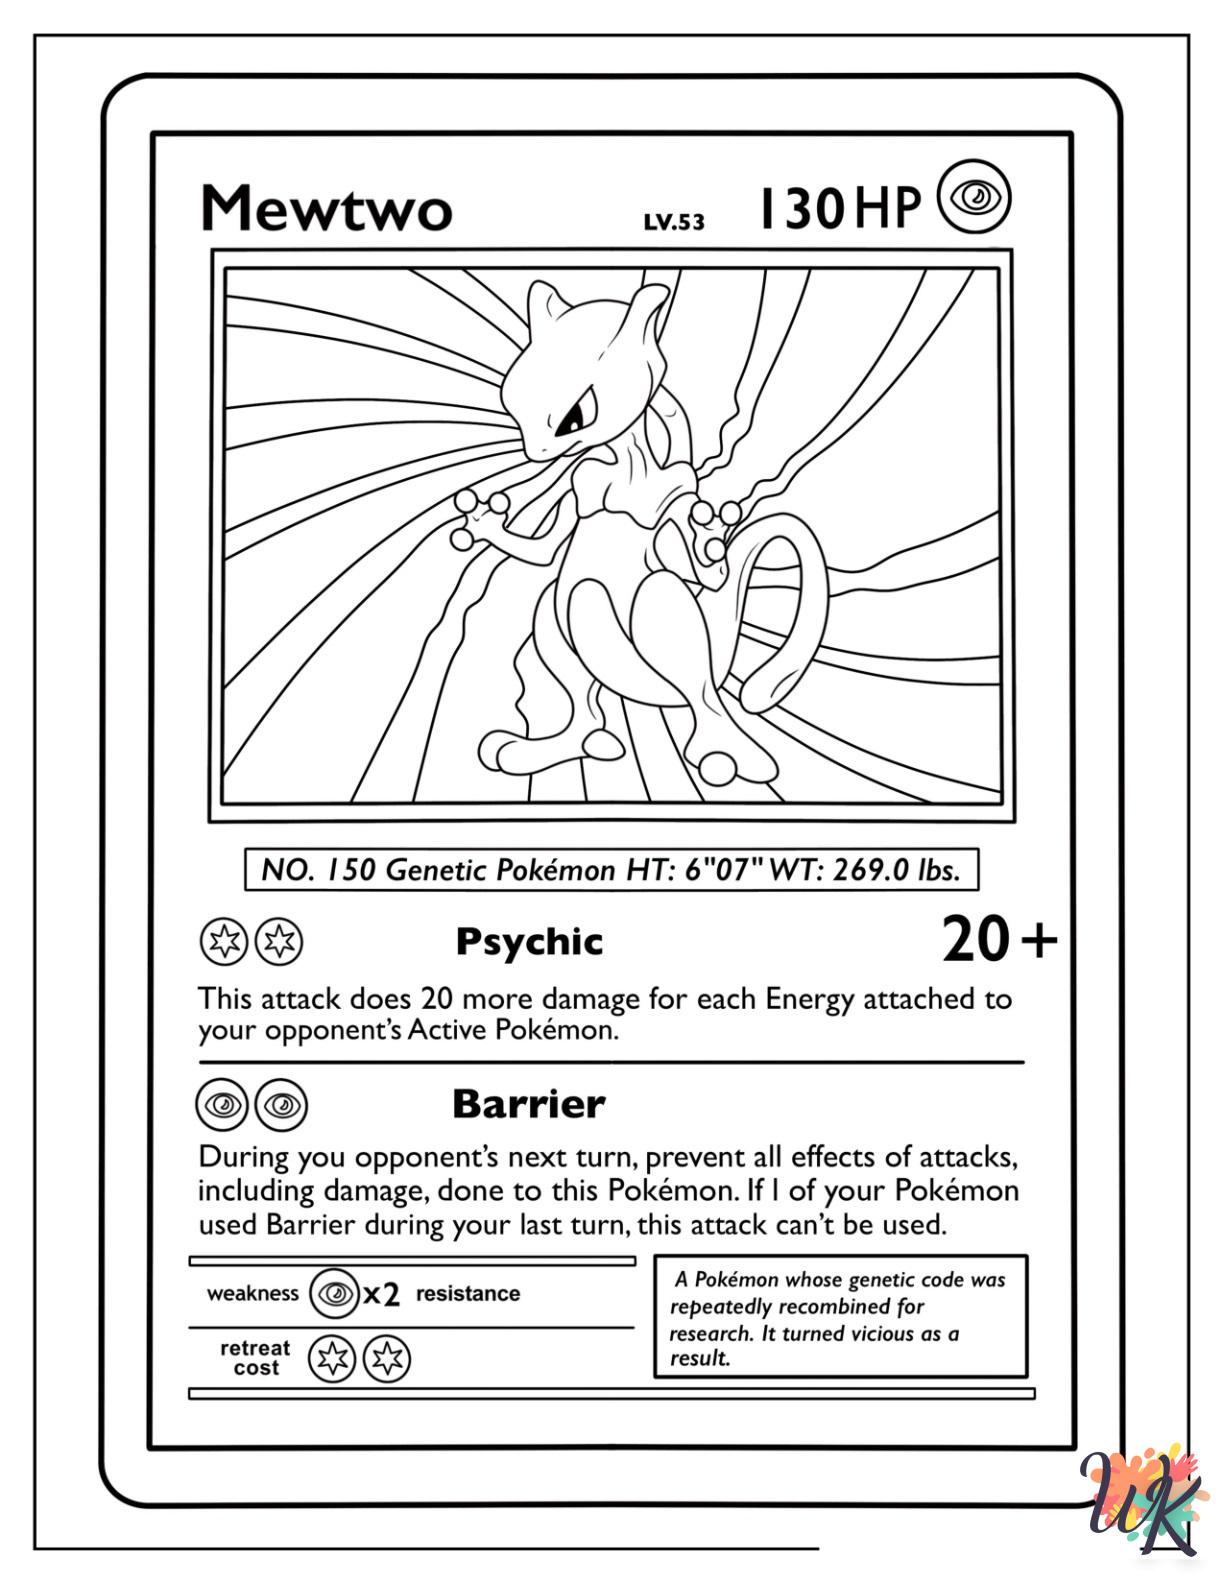 Legendary Pokemon coloring pages free